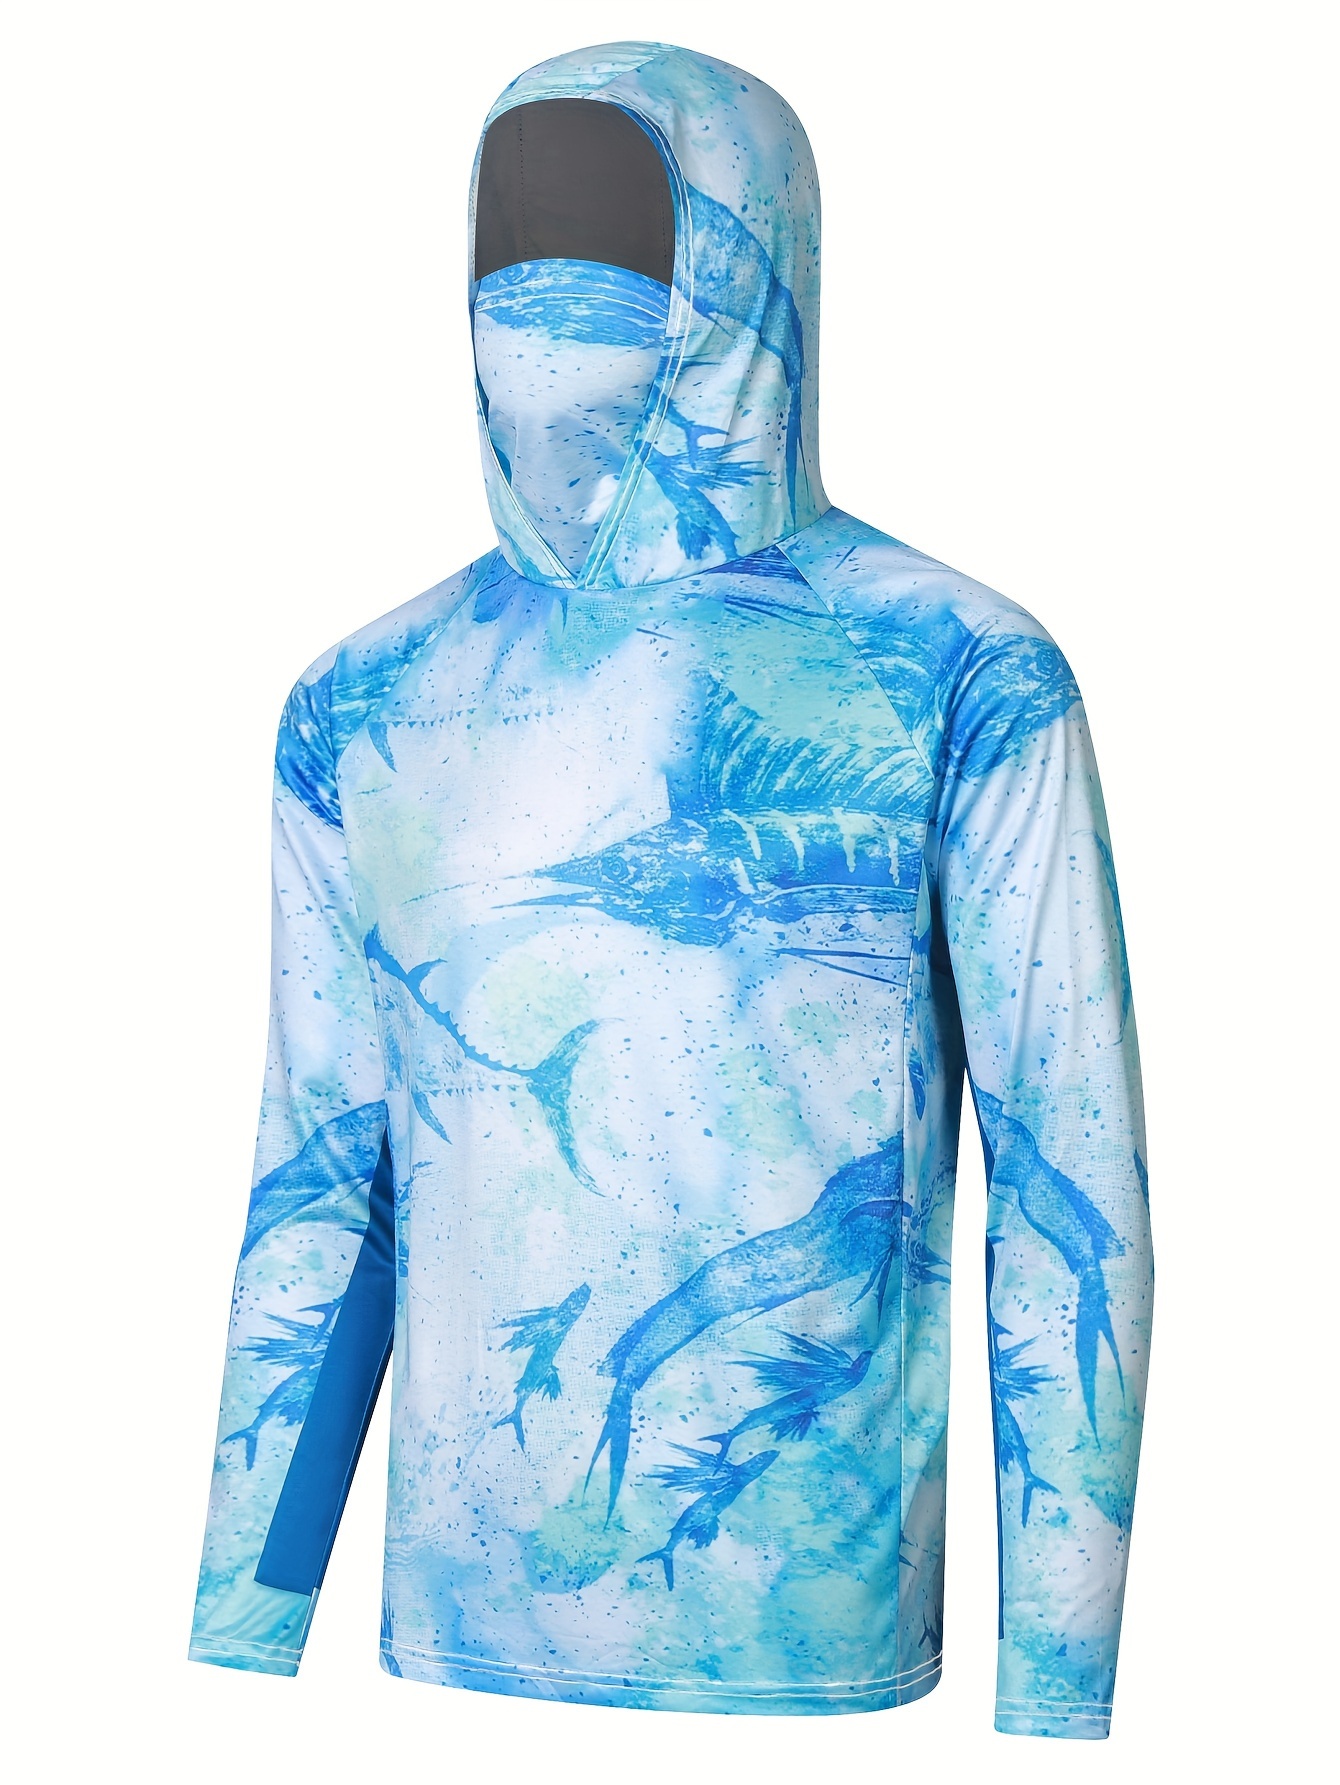 Men's Upf 50+ Sun Protection Hooded Shirt With Mask, Active Fish Scale Print Quick Dry Slightly Stretch Long Sleeve Rash Guard For Fishing Hiking